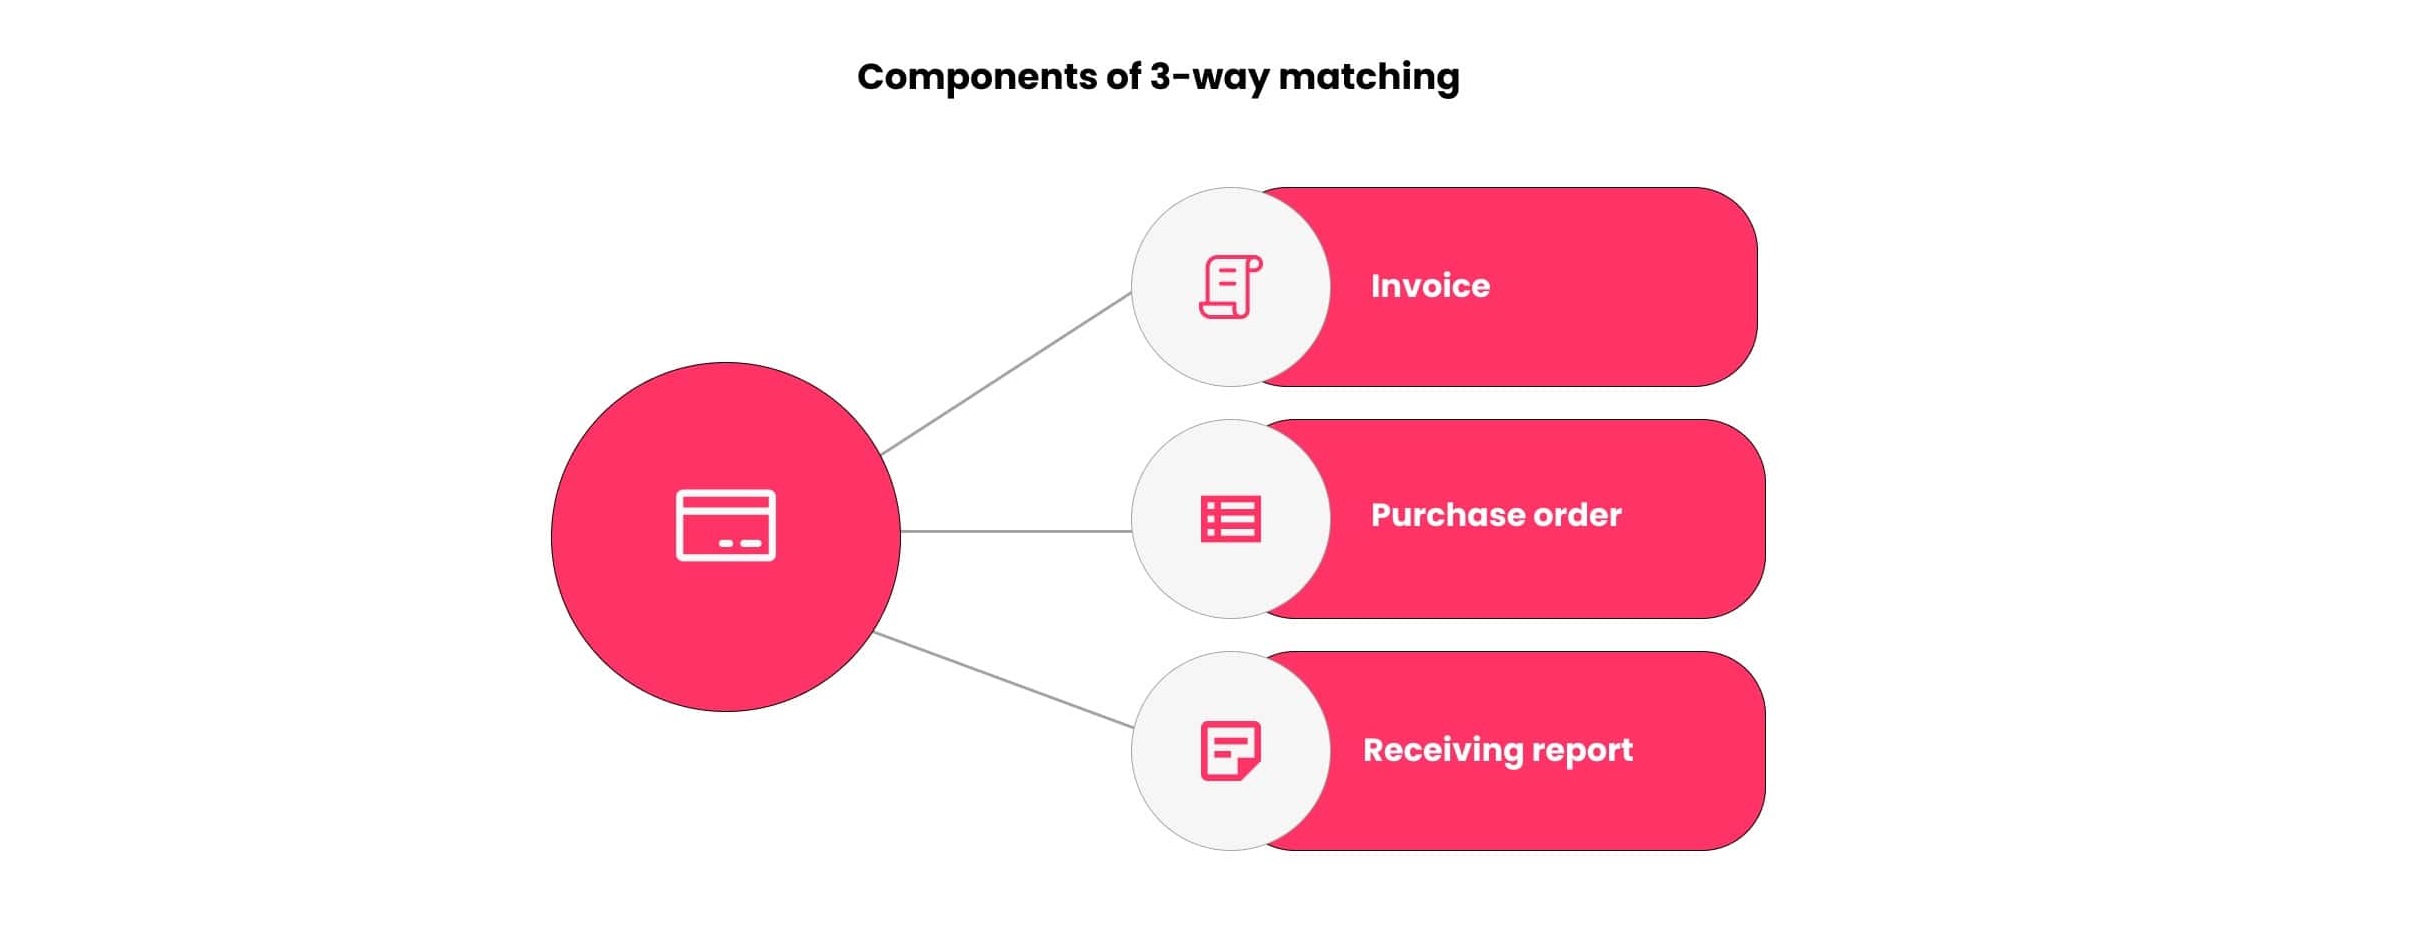 Components of 3-way matching